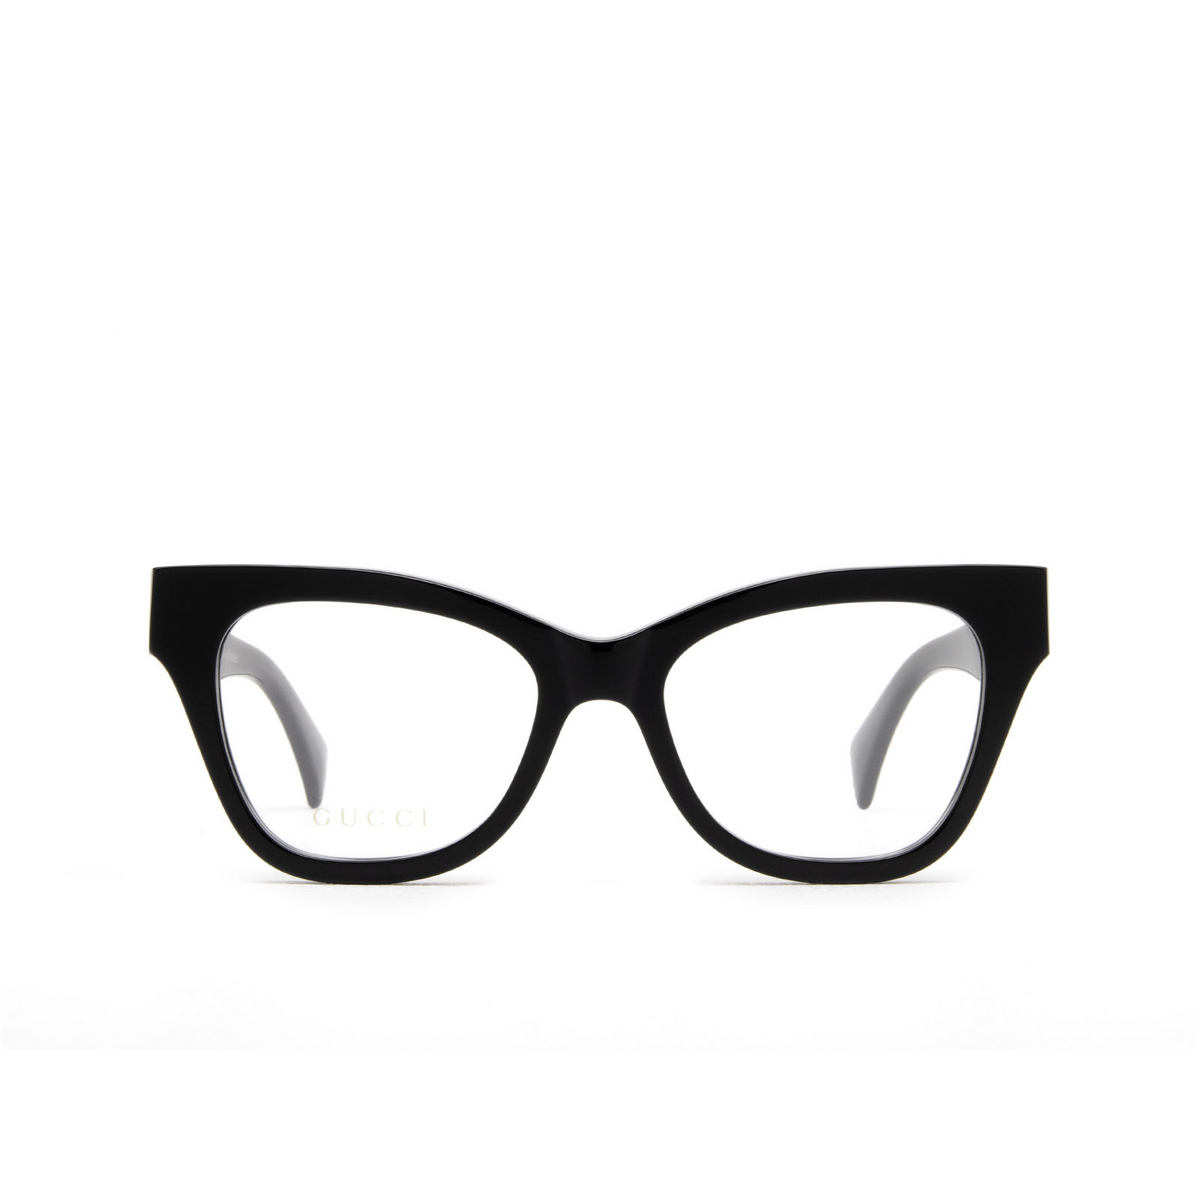 Gucci® Cat-eye Eyeglasses: GG1133O color Black 003 - front view.